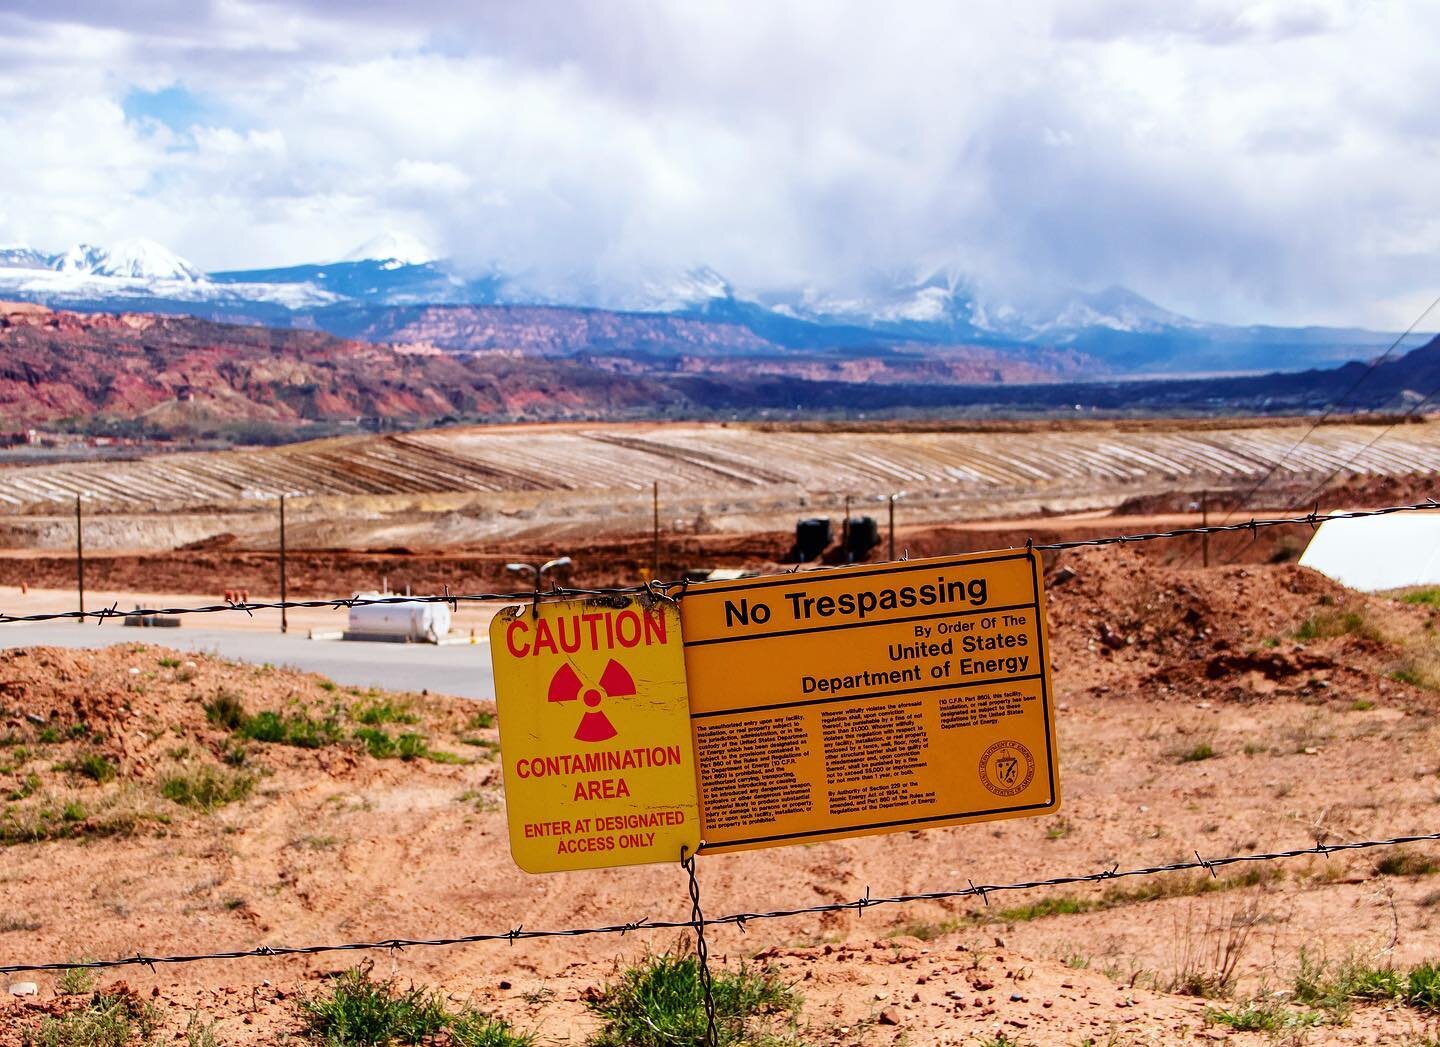 ☢️ CONTAMINATION AREA ☢️ 

This is the Moab Uranium Mill Tailings Pile, basically a unlined waste pond from a uranium mill next to the Colorado River in Moab, UT. Neat.